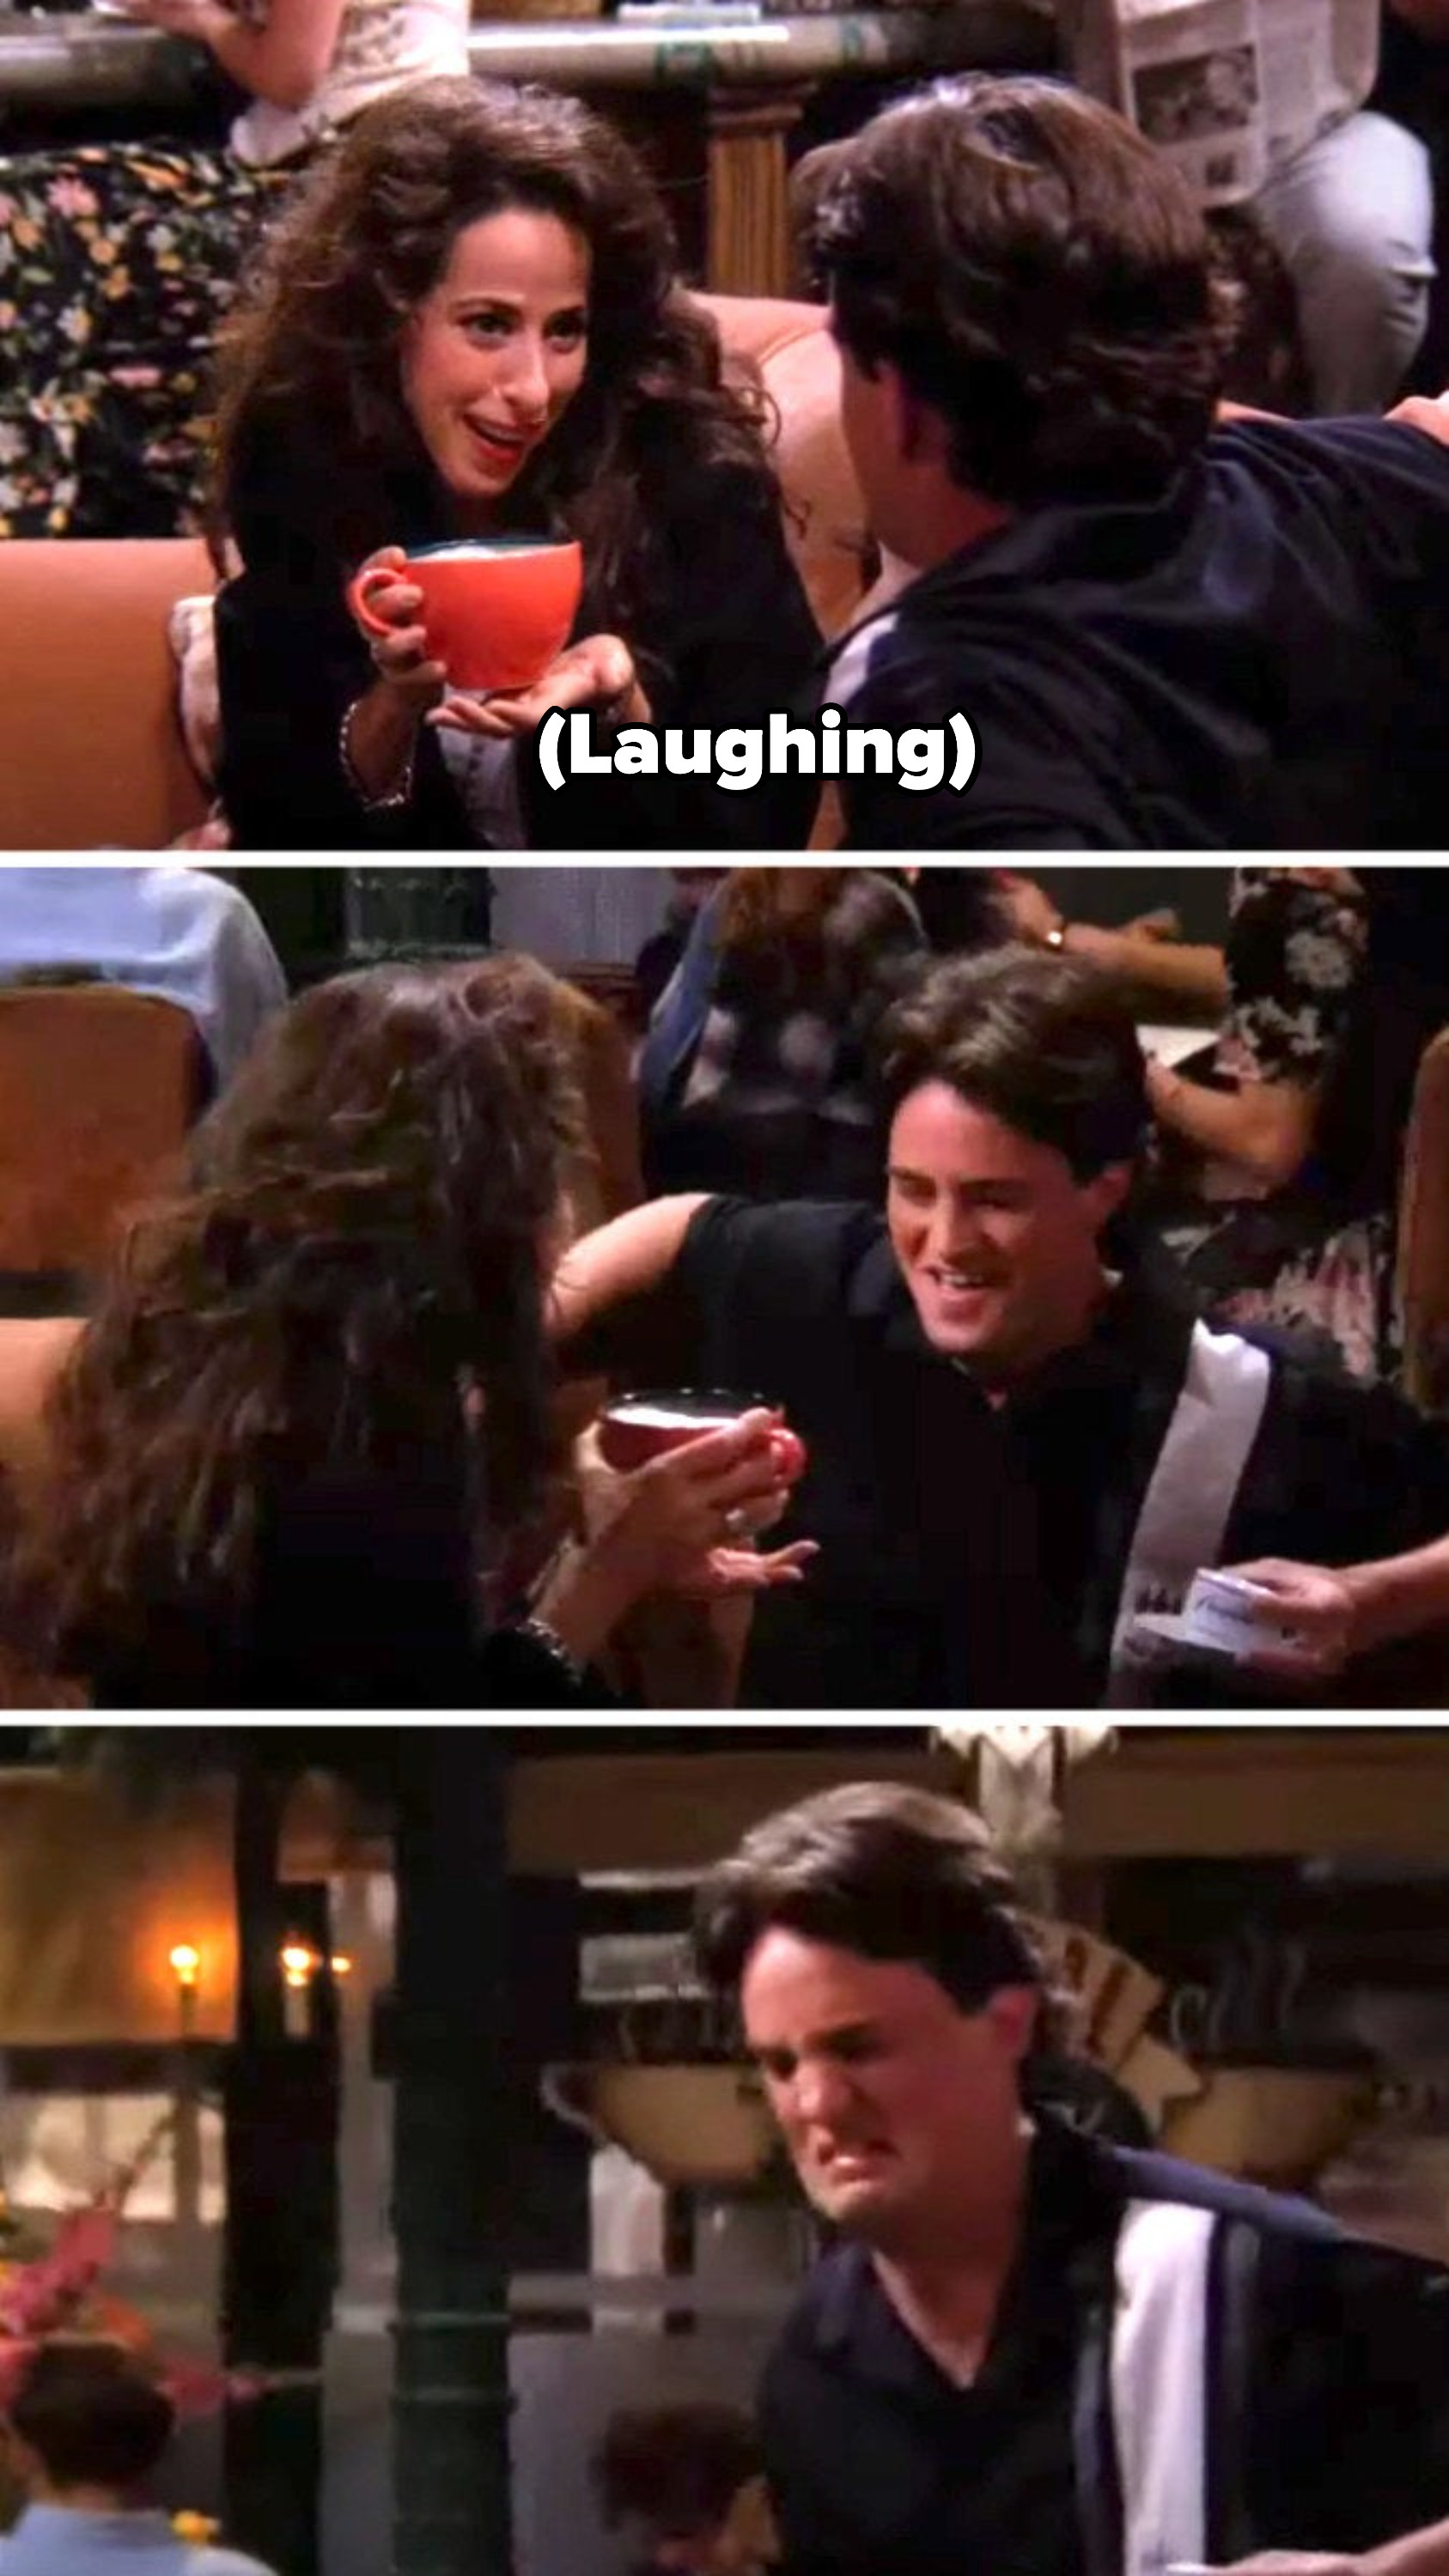 On Friends, Chandler laughs with Monica, then stands and makes a disgusted face